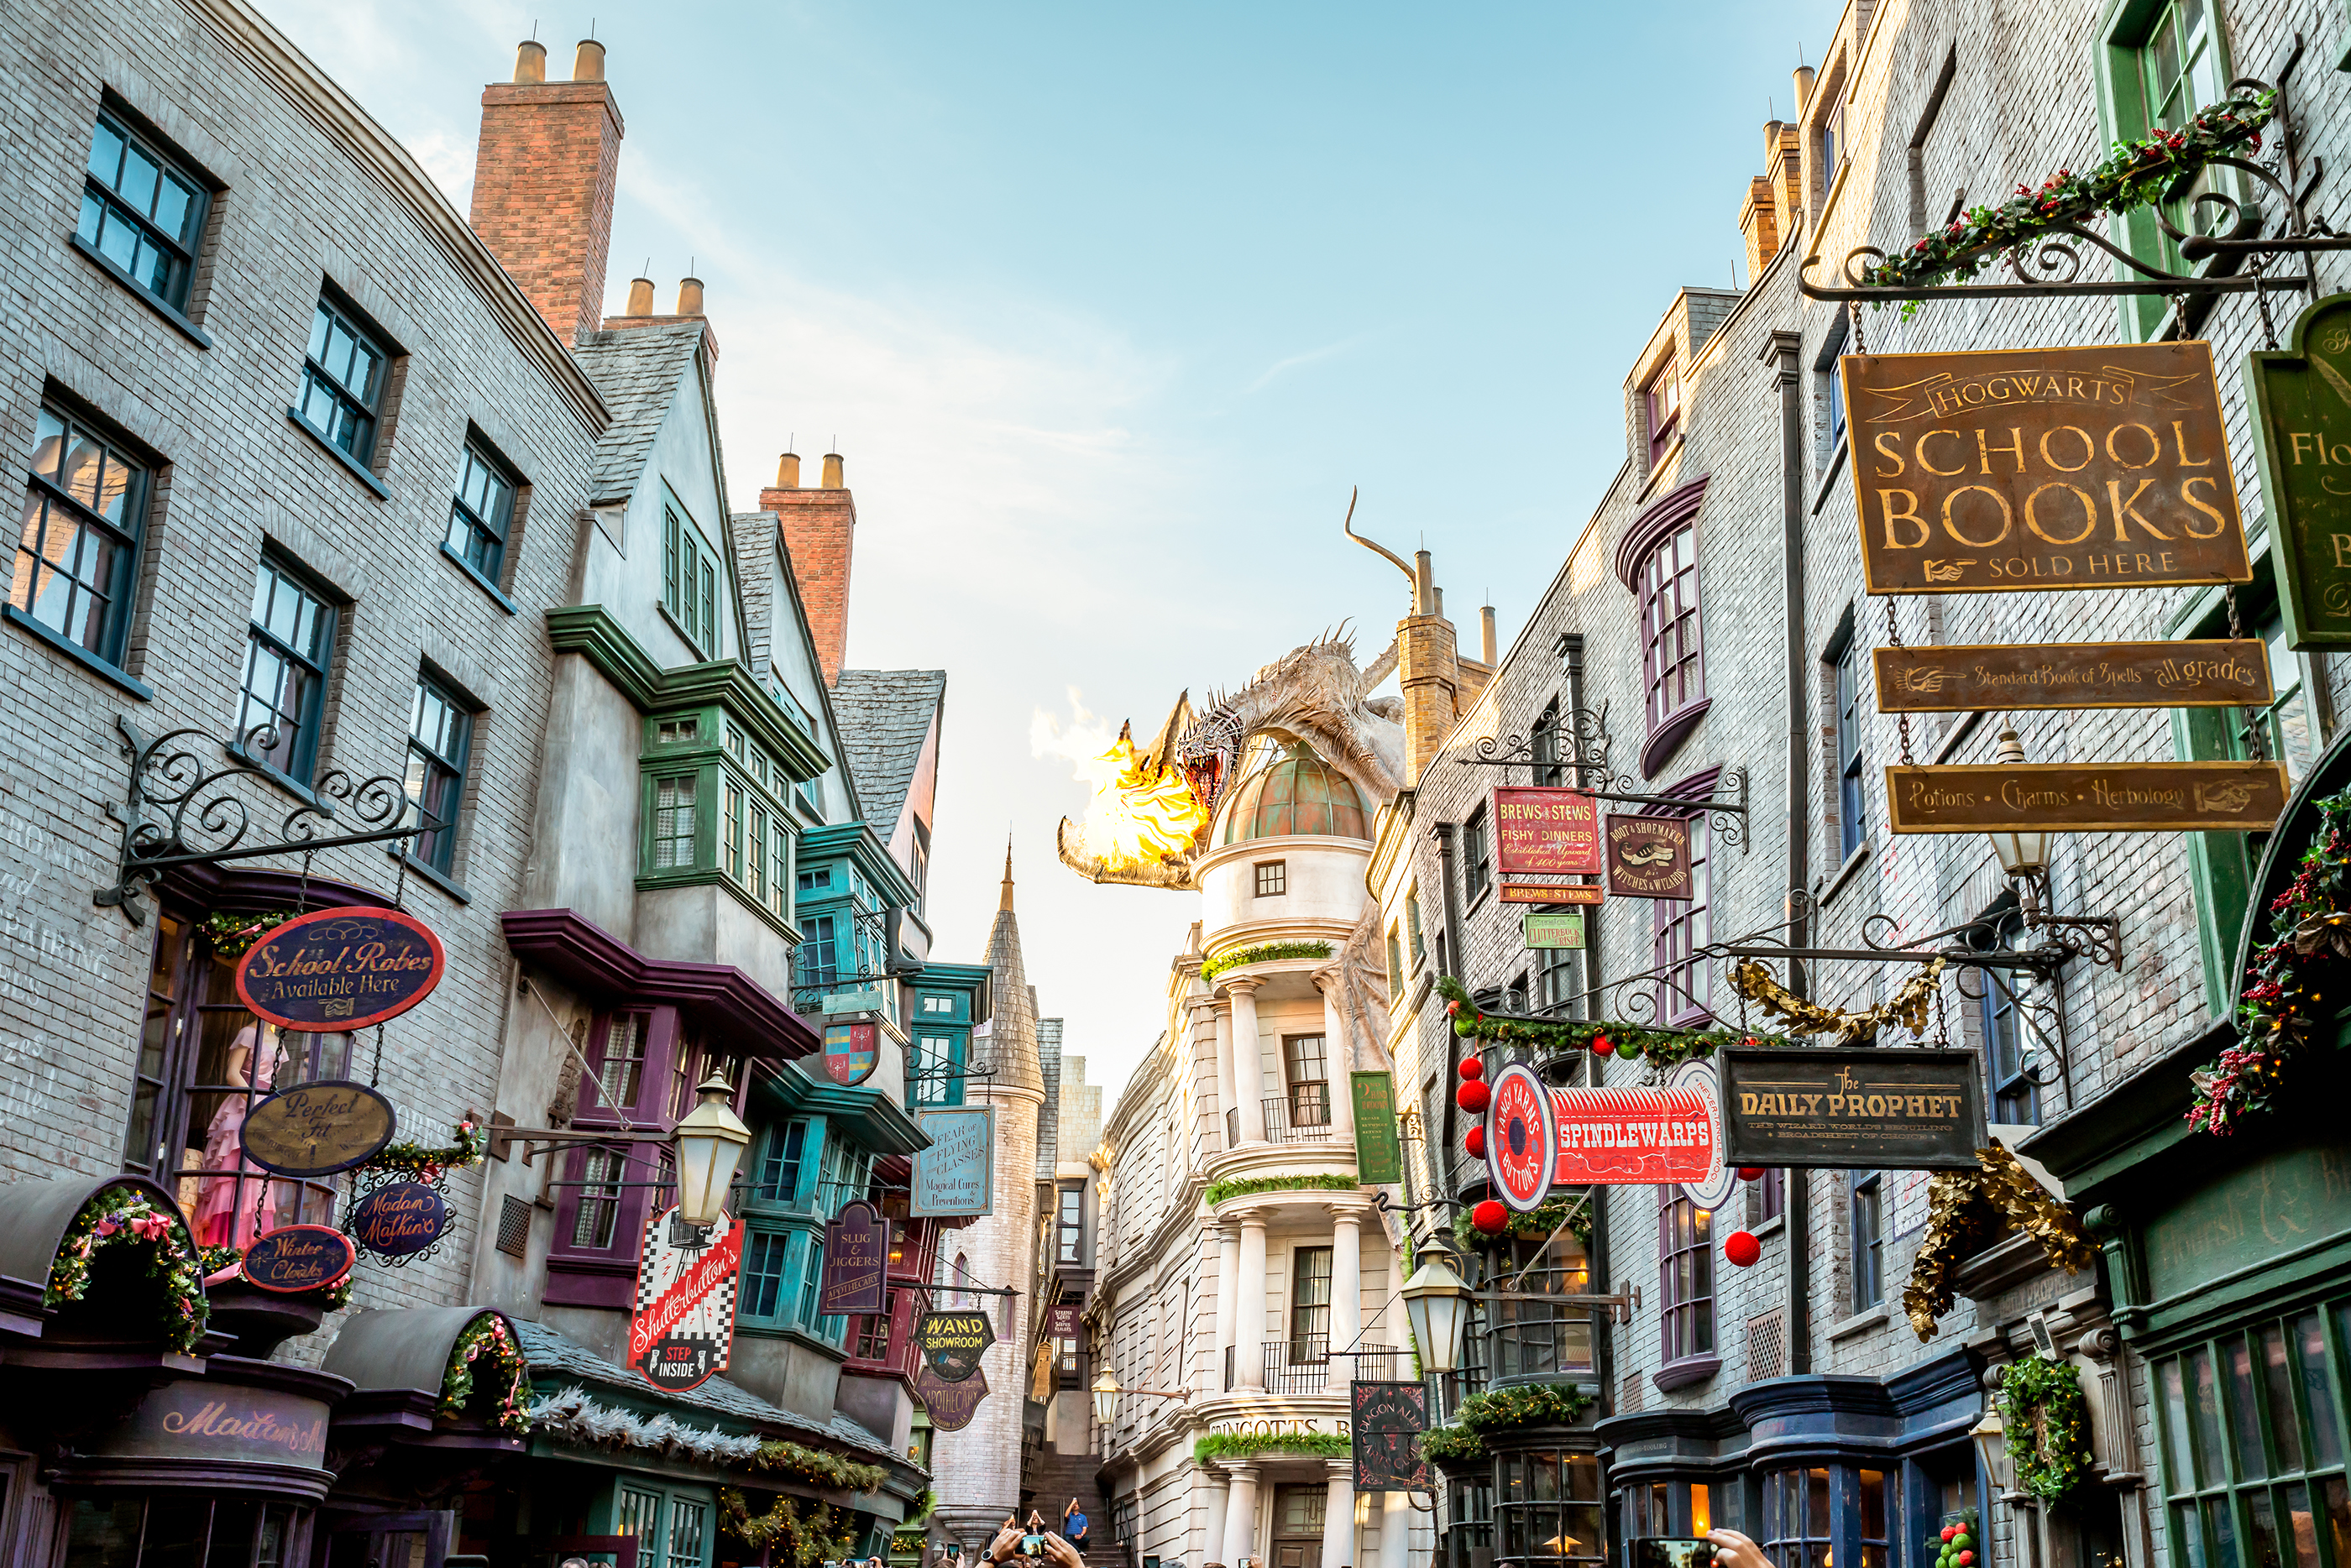 The Wizarding World of Harry Potter â The iconic dragon at Diagon Alley, Universal Studios Florida.